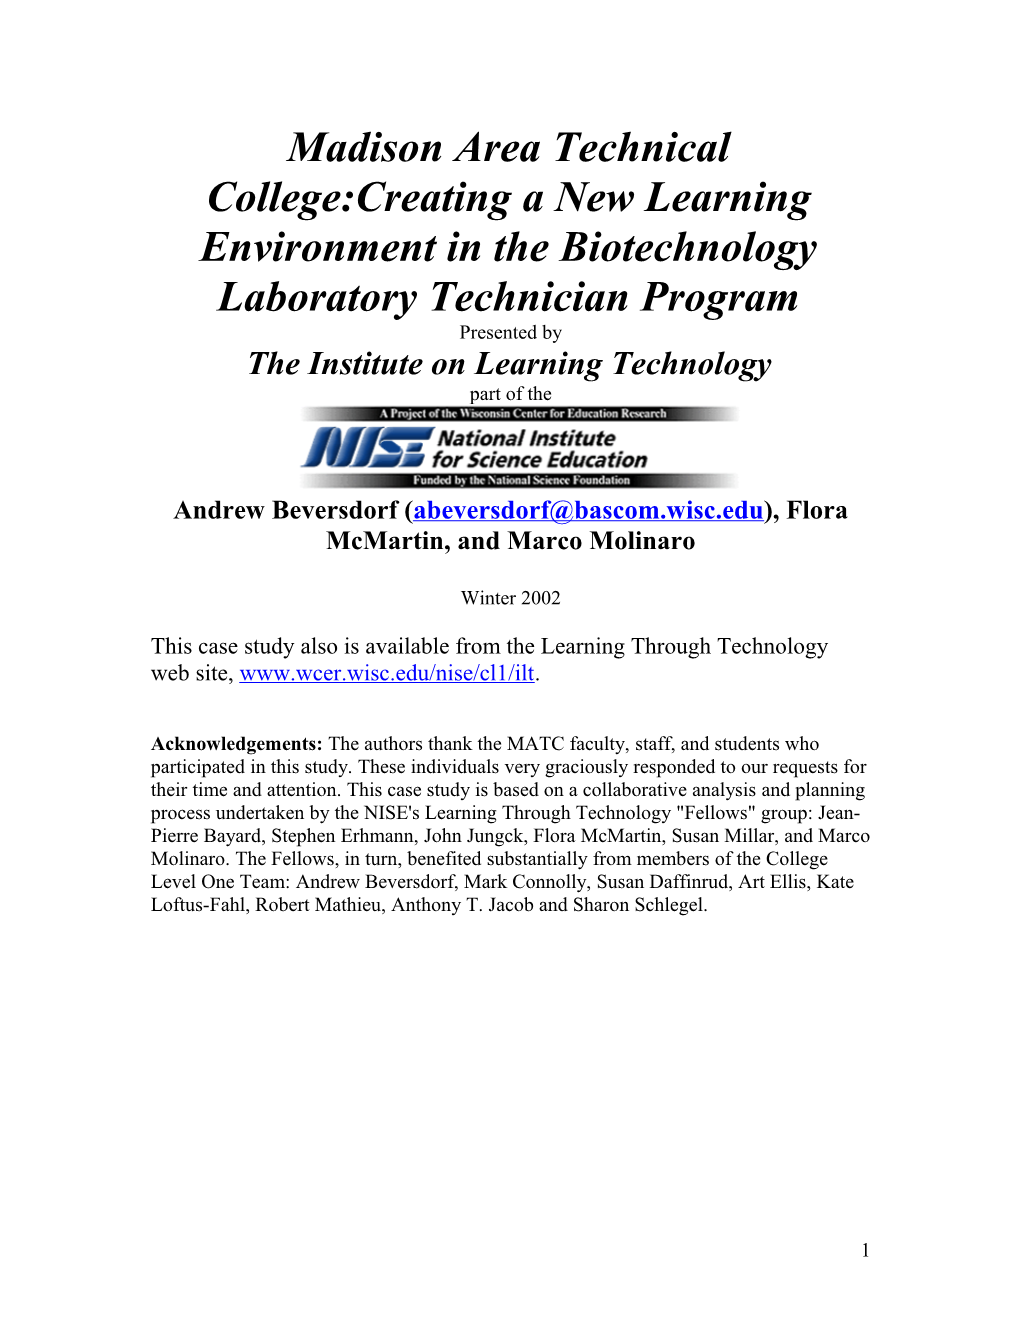 Madison Area Technical College:Creating a New Learning Environment in the Biotechnology